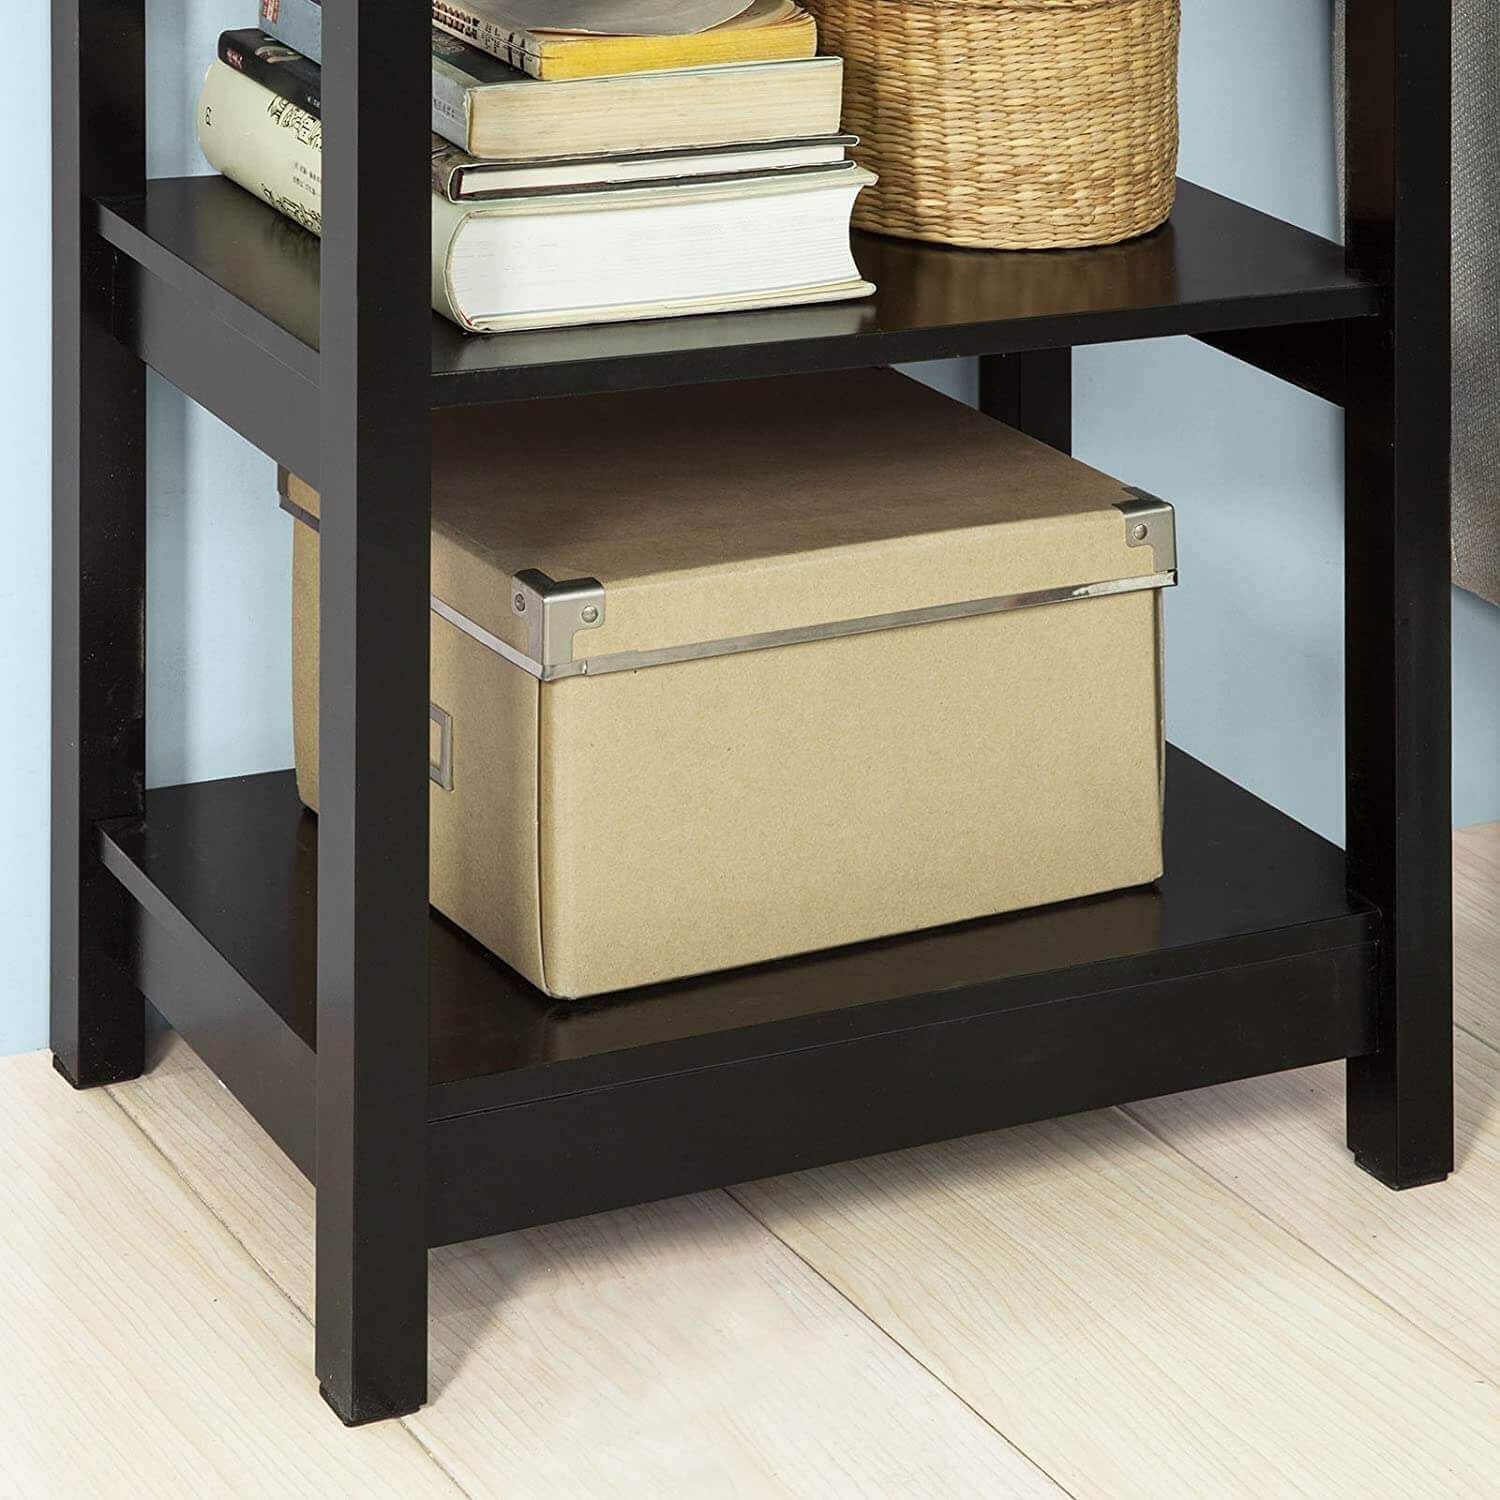 Black Bedside Table with 1 Drawer and 2 Shelves-Upinteriors